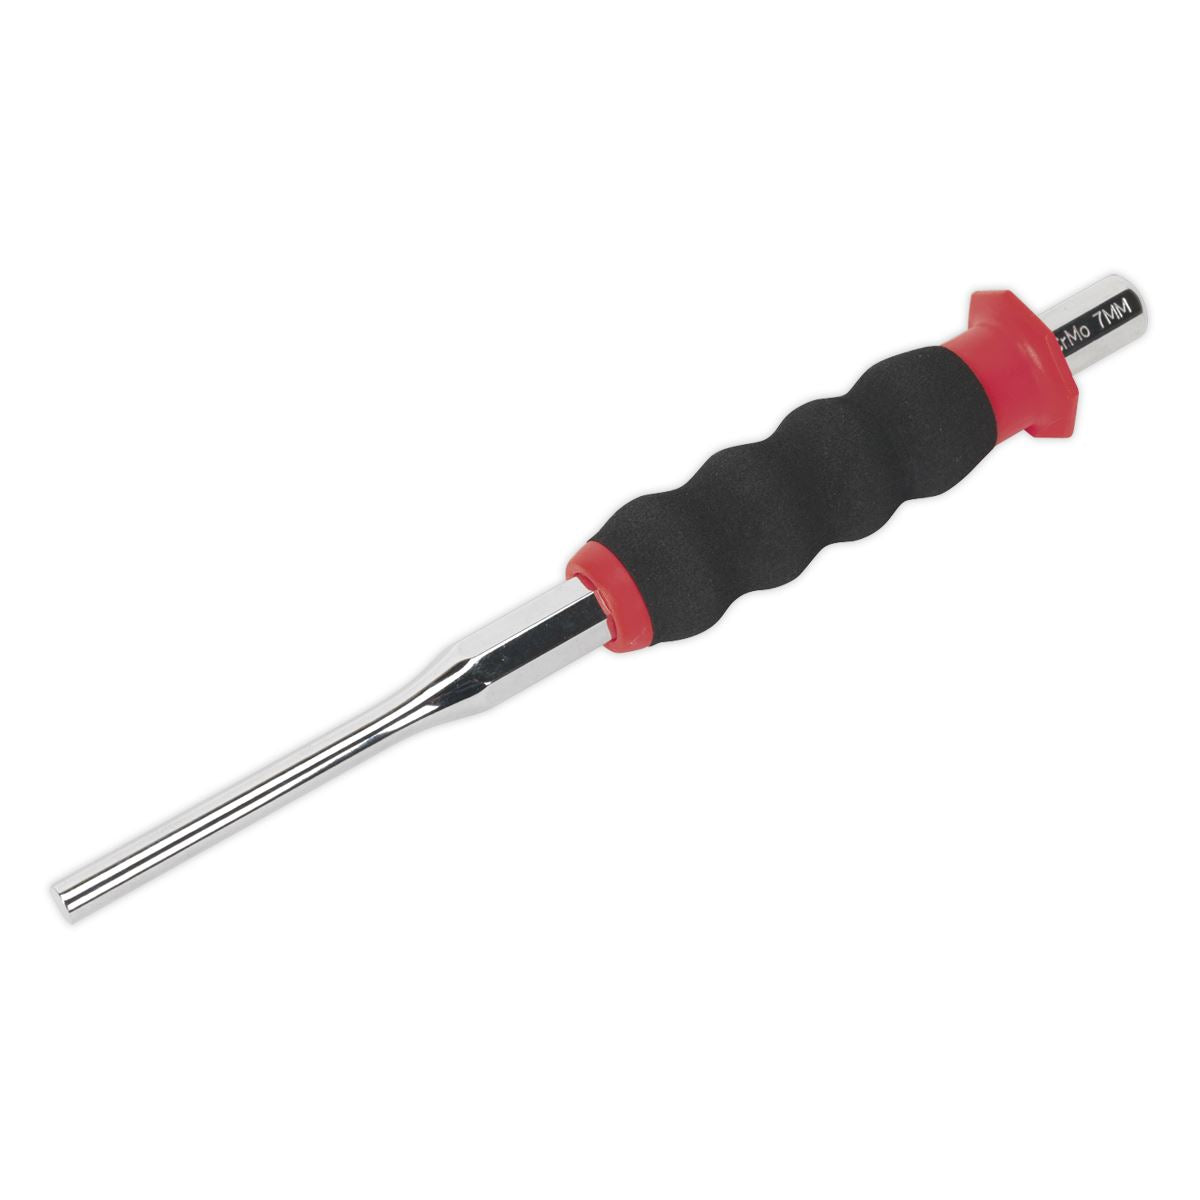 Sealey Premier Sheathed Parallel Pin Punch Ø7mm